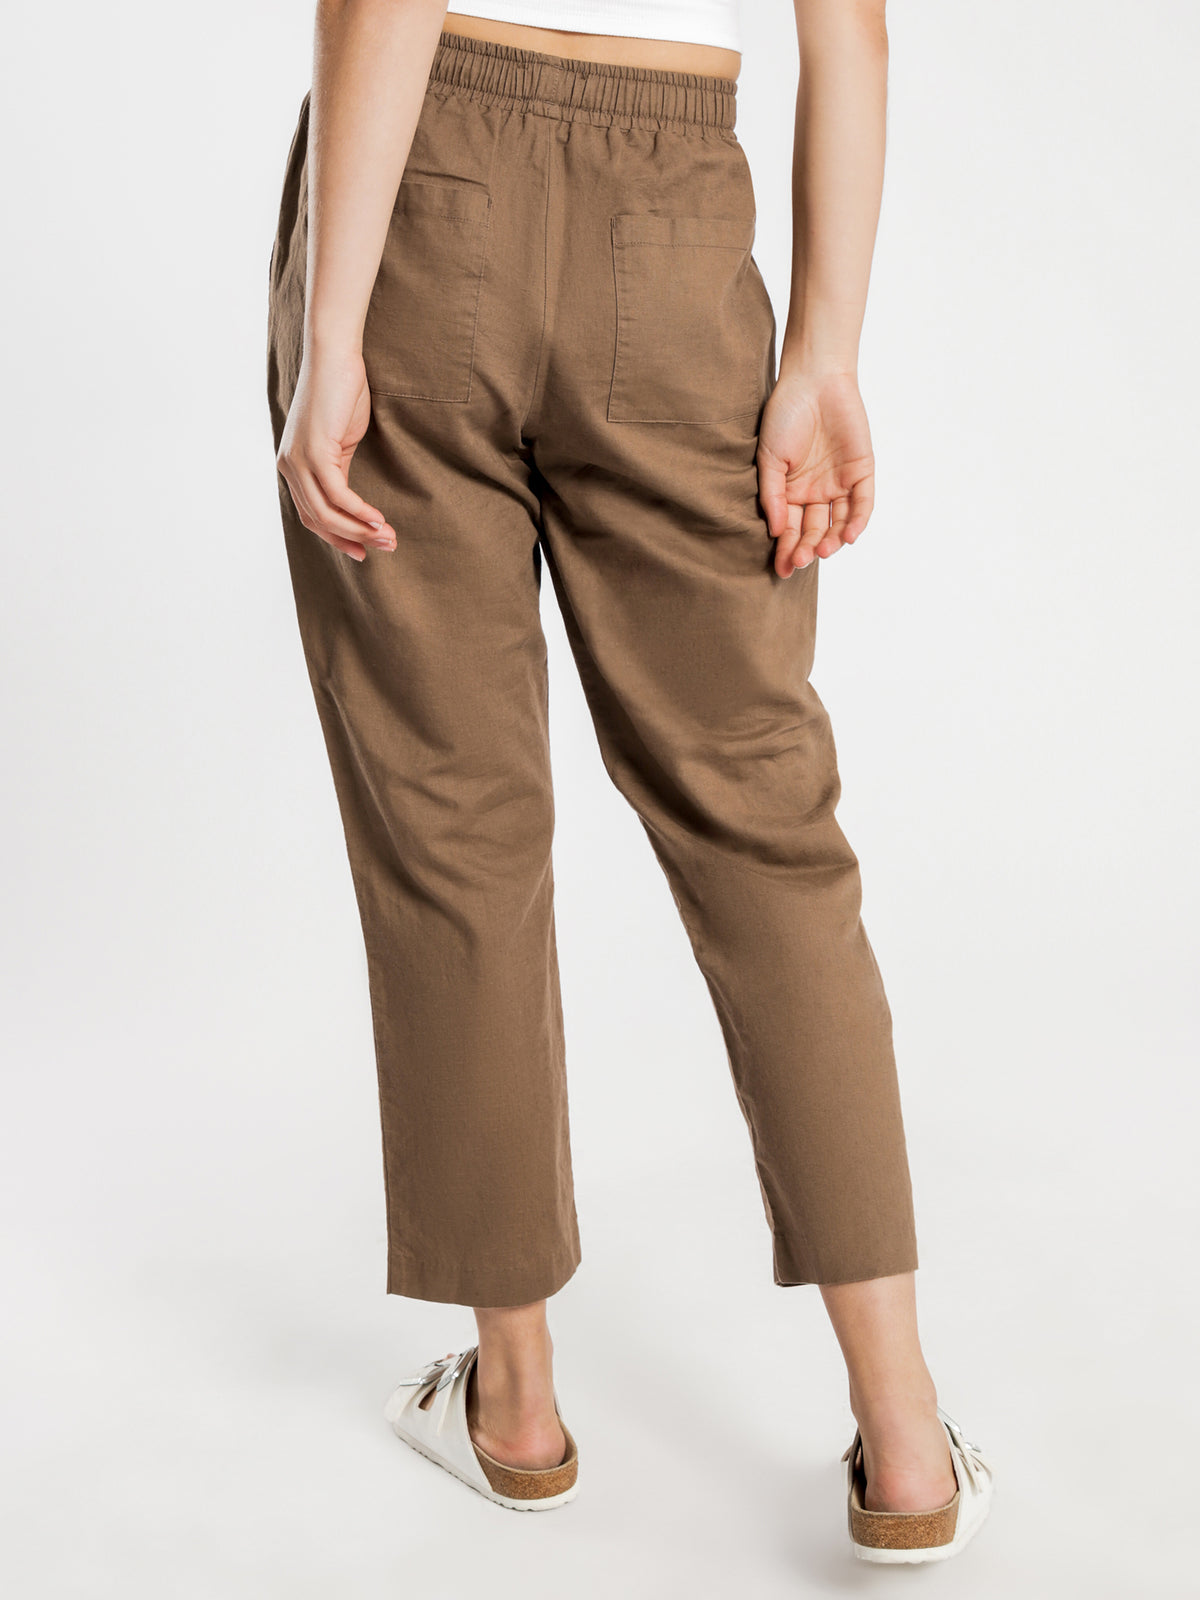 Classic Pants in Chocolate